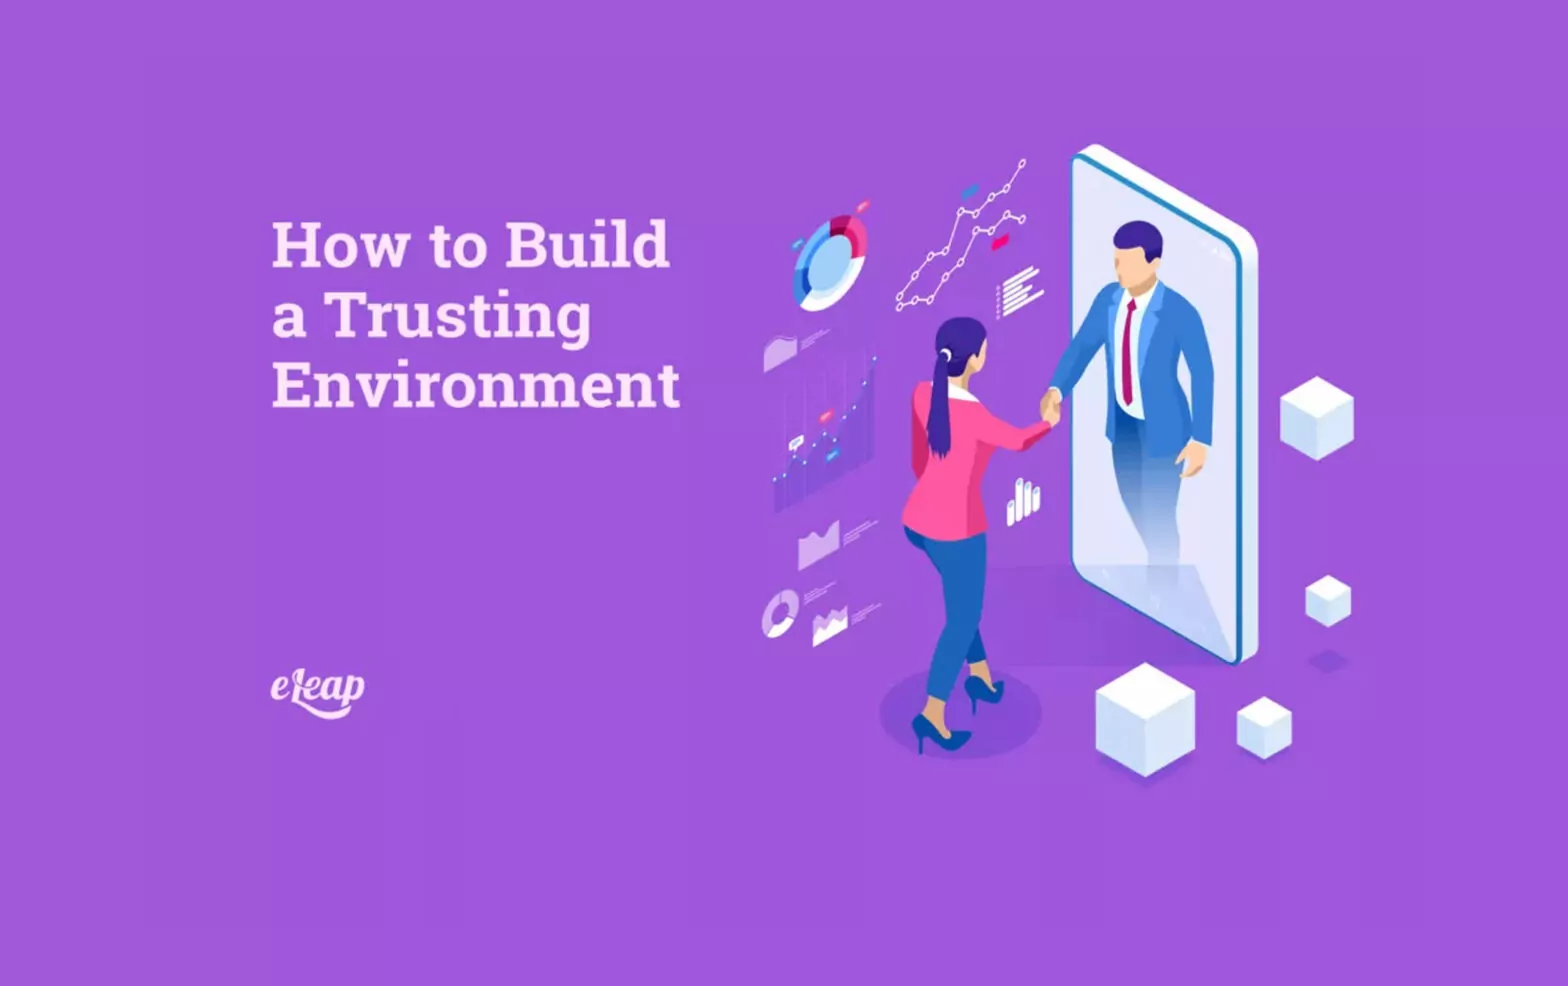 How to Build a Trusting Environment